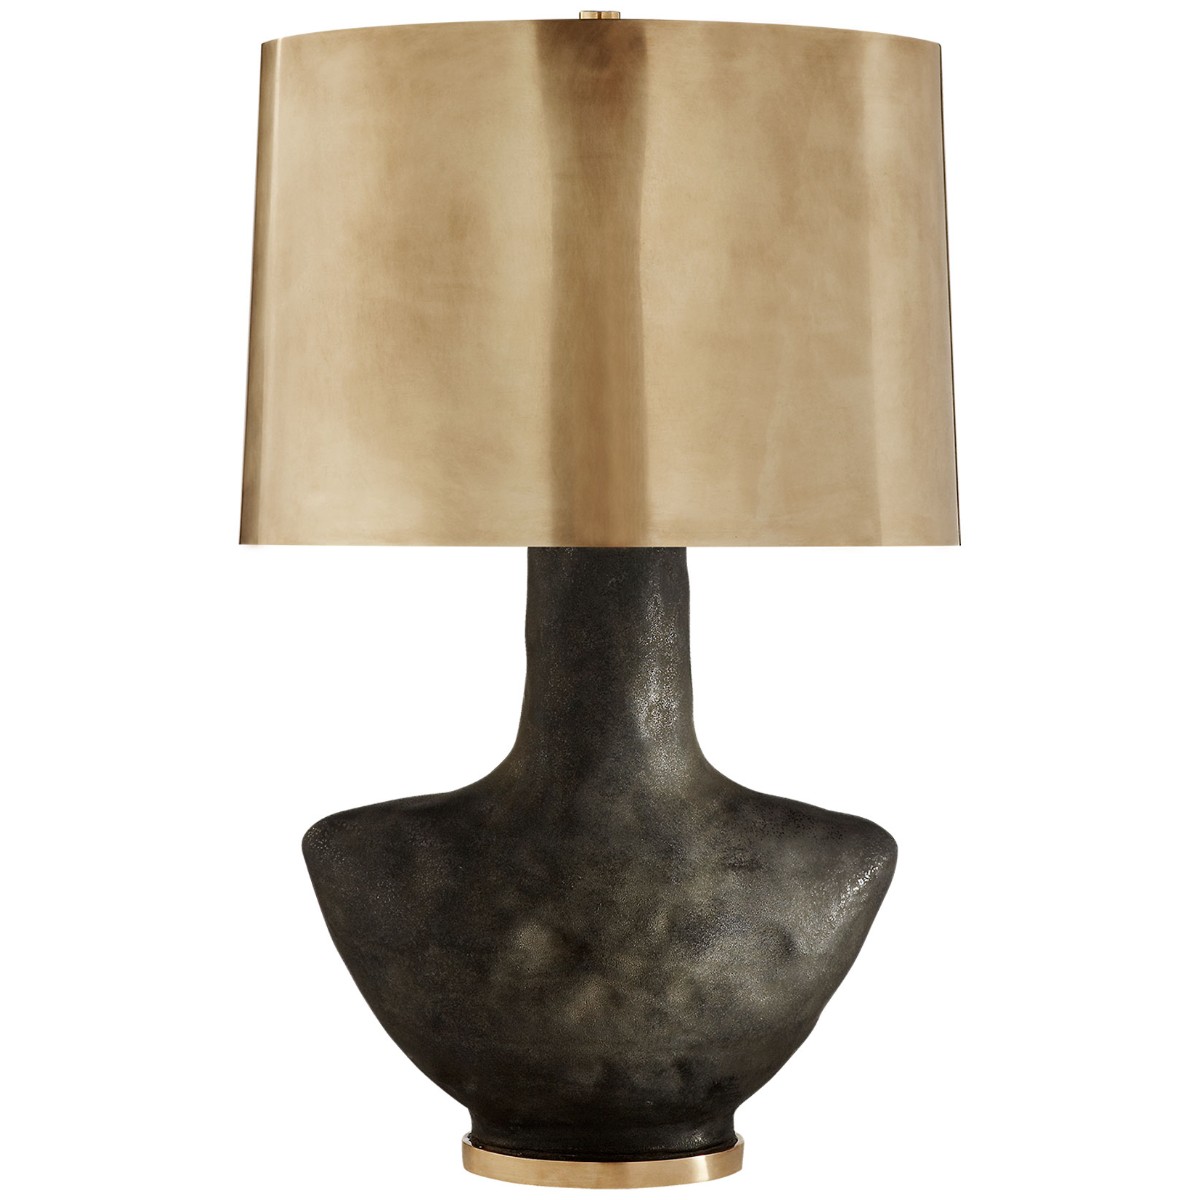 Kelly Wearstler | Armato Table Lamp | Black with Antique Burnished Brass Shade